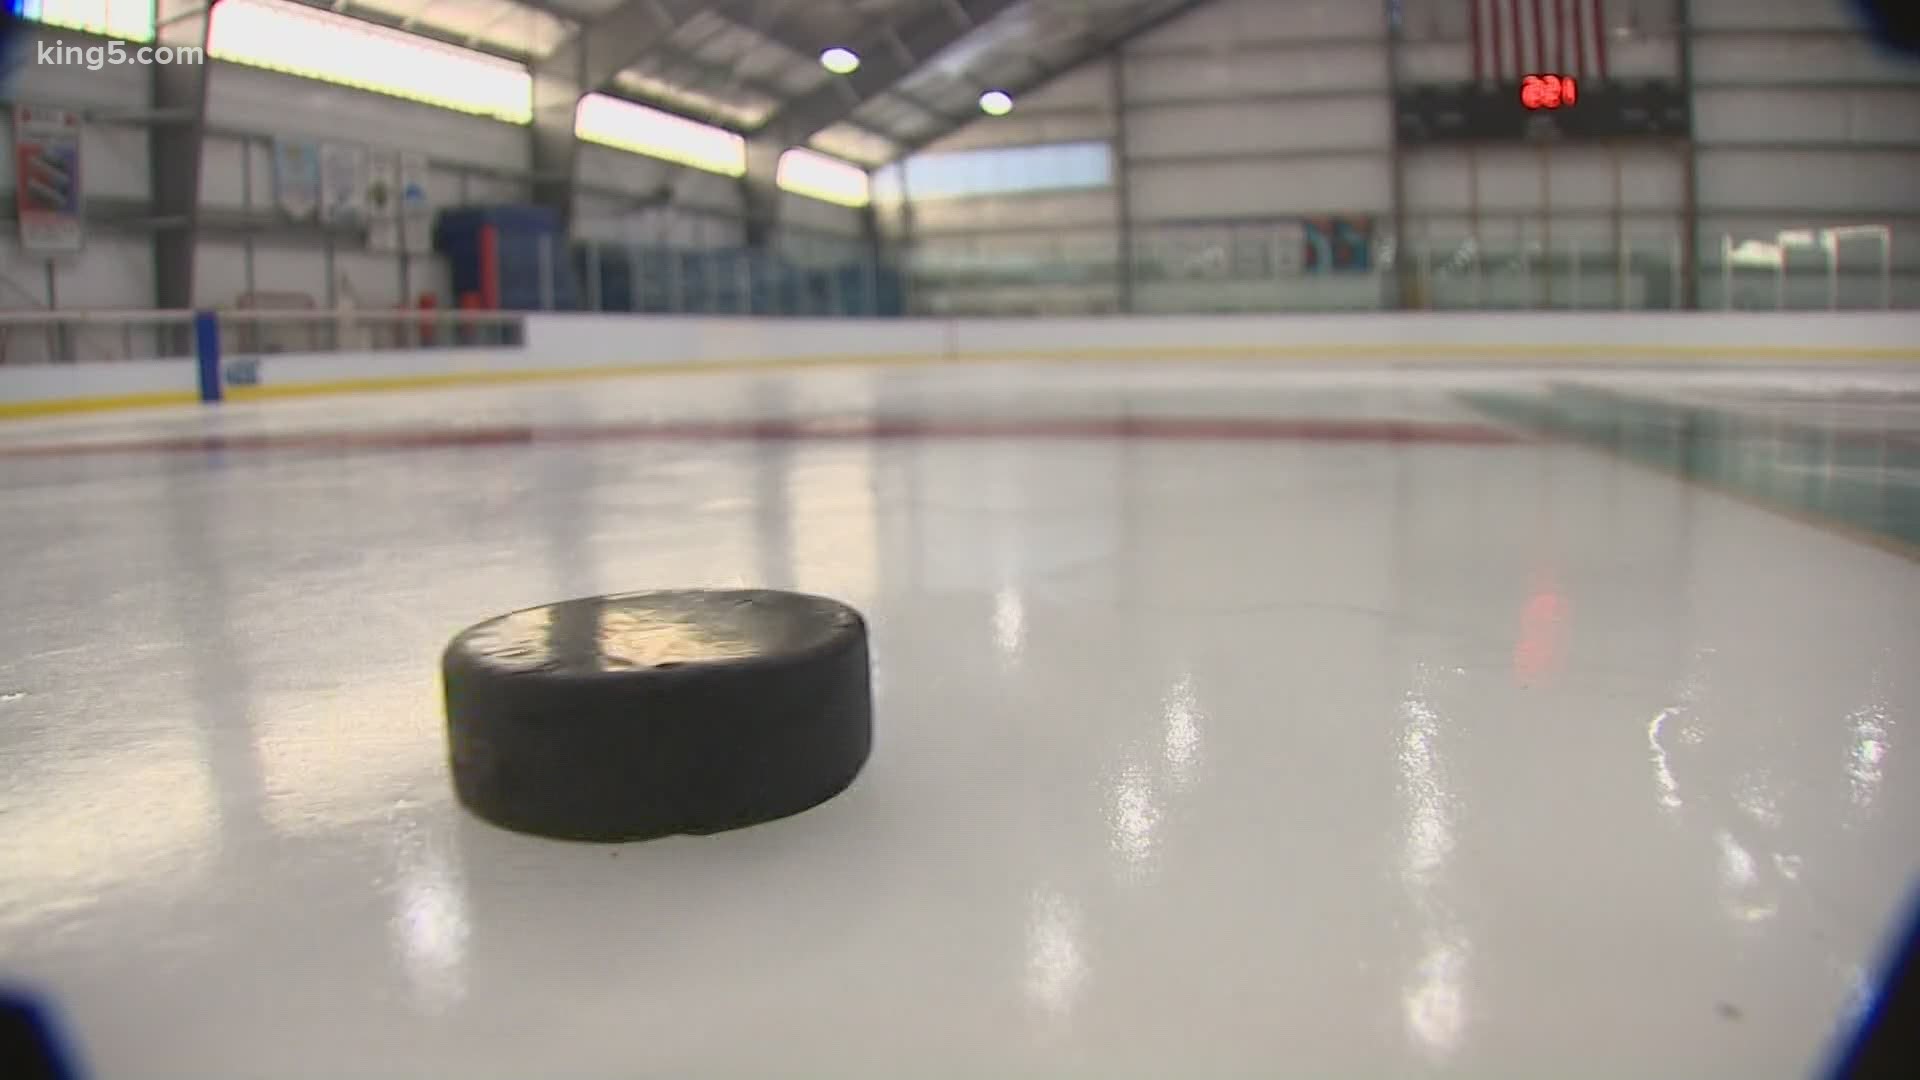 Ice rinks have been shut completely with Washington's renewed restrictions on indoor fitness facilities sparked by a recent statewide surge in coronavirus cases.